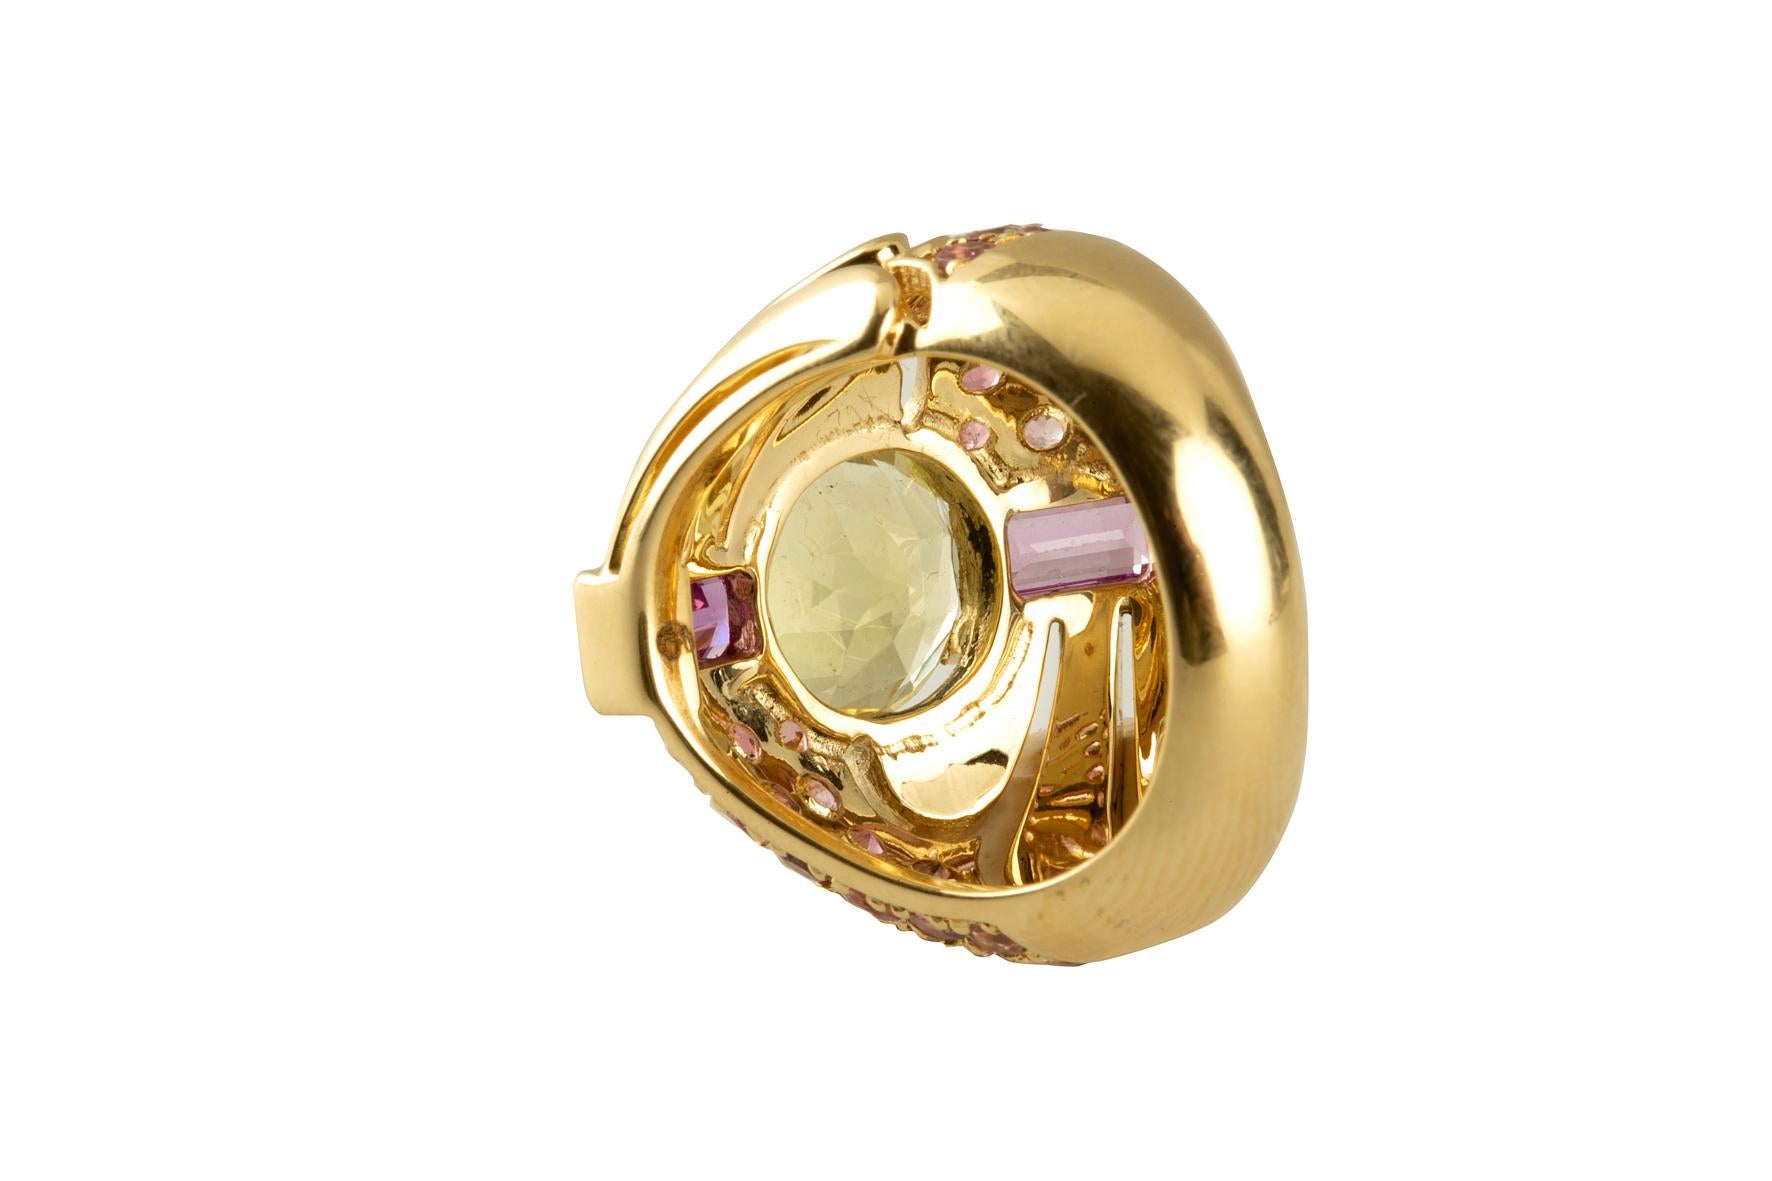 Amazing liberty shape ring 1,60 cts central yellow kunzite 10cts pink natural sapphire 18 kt gold gr 16,20 size 14 eu.
All Giulia Colussi jewelry is new and has never been previously owned or worn. Each item will arrive at your door beautifully gift